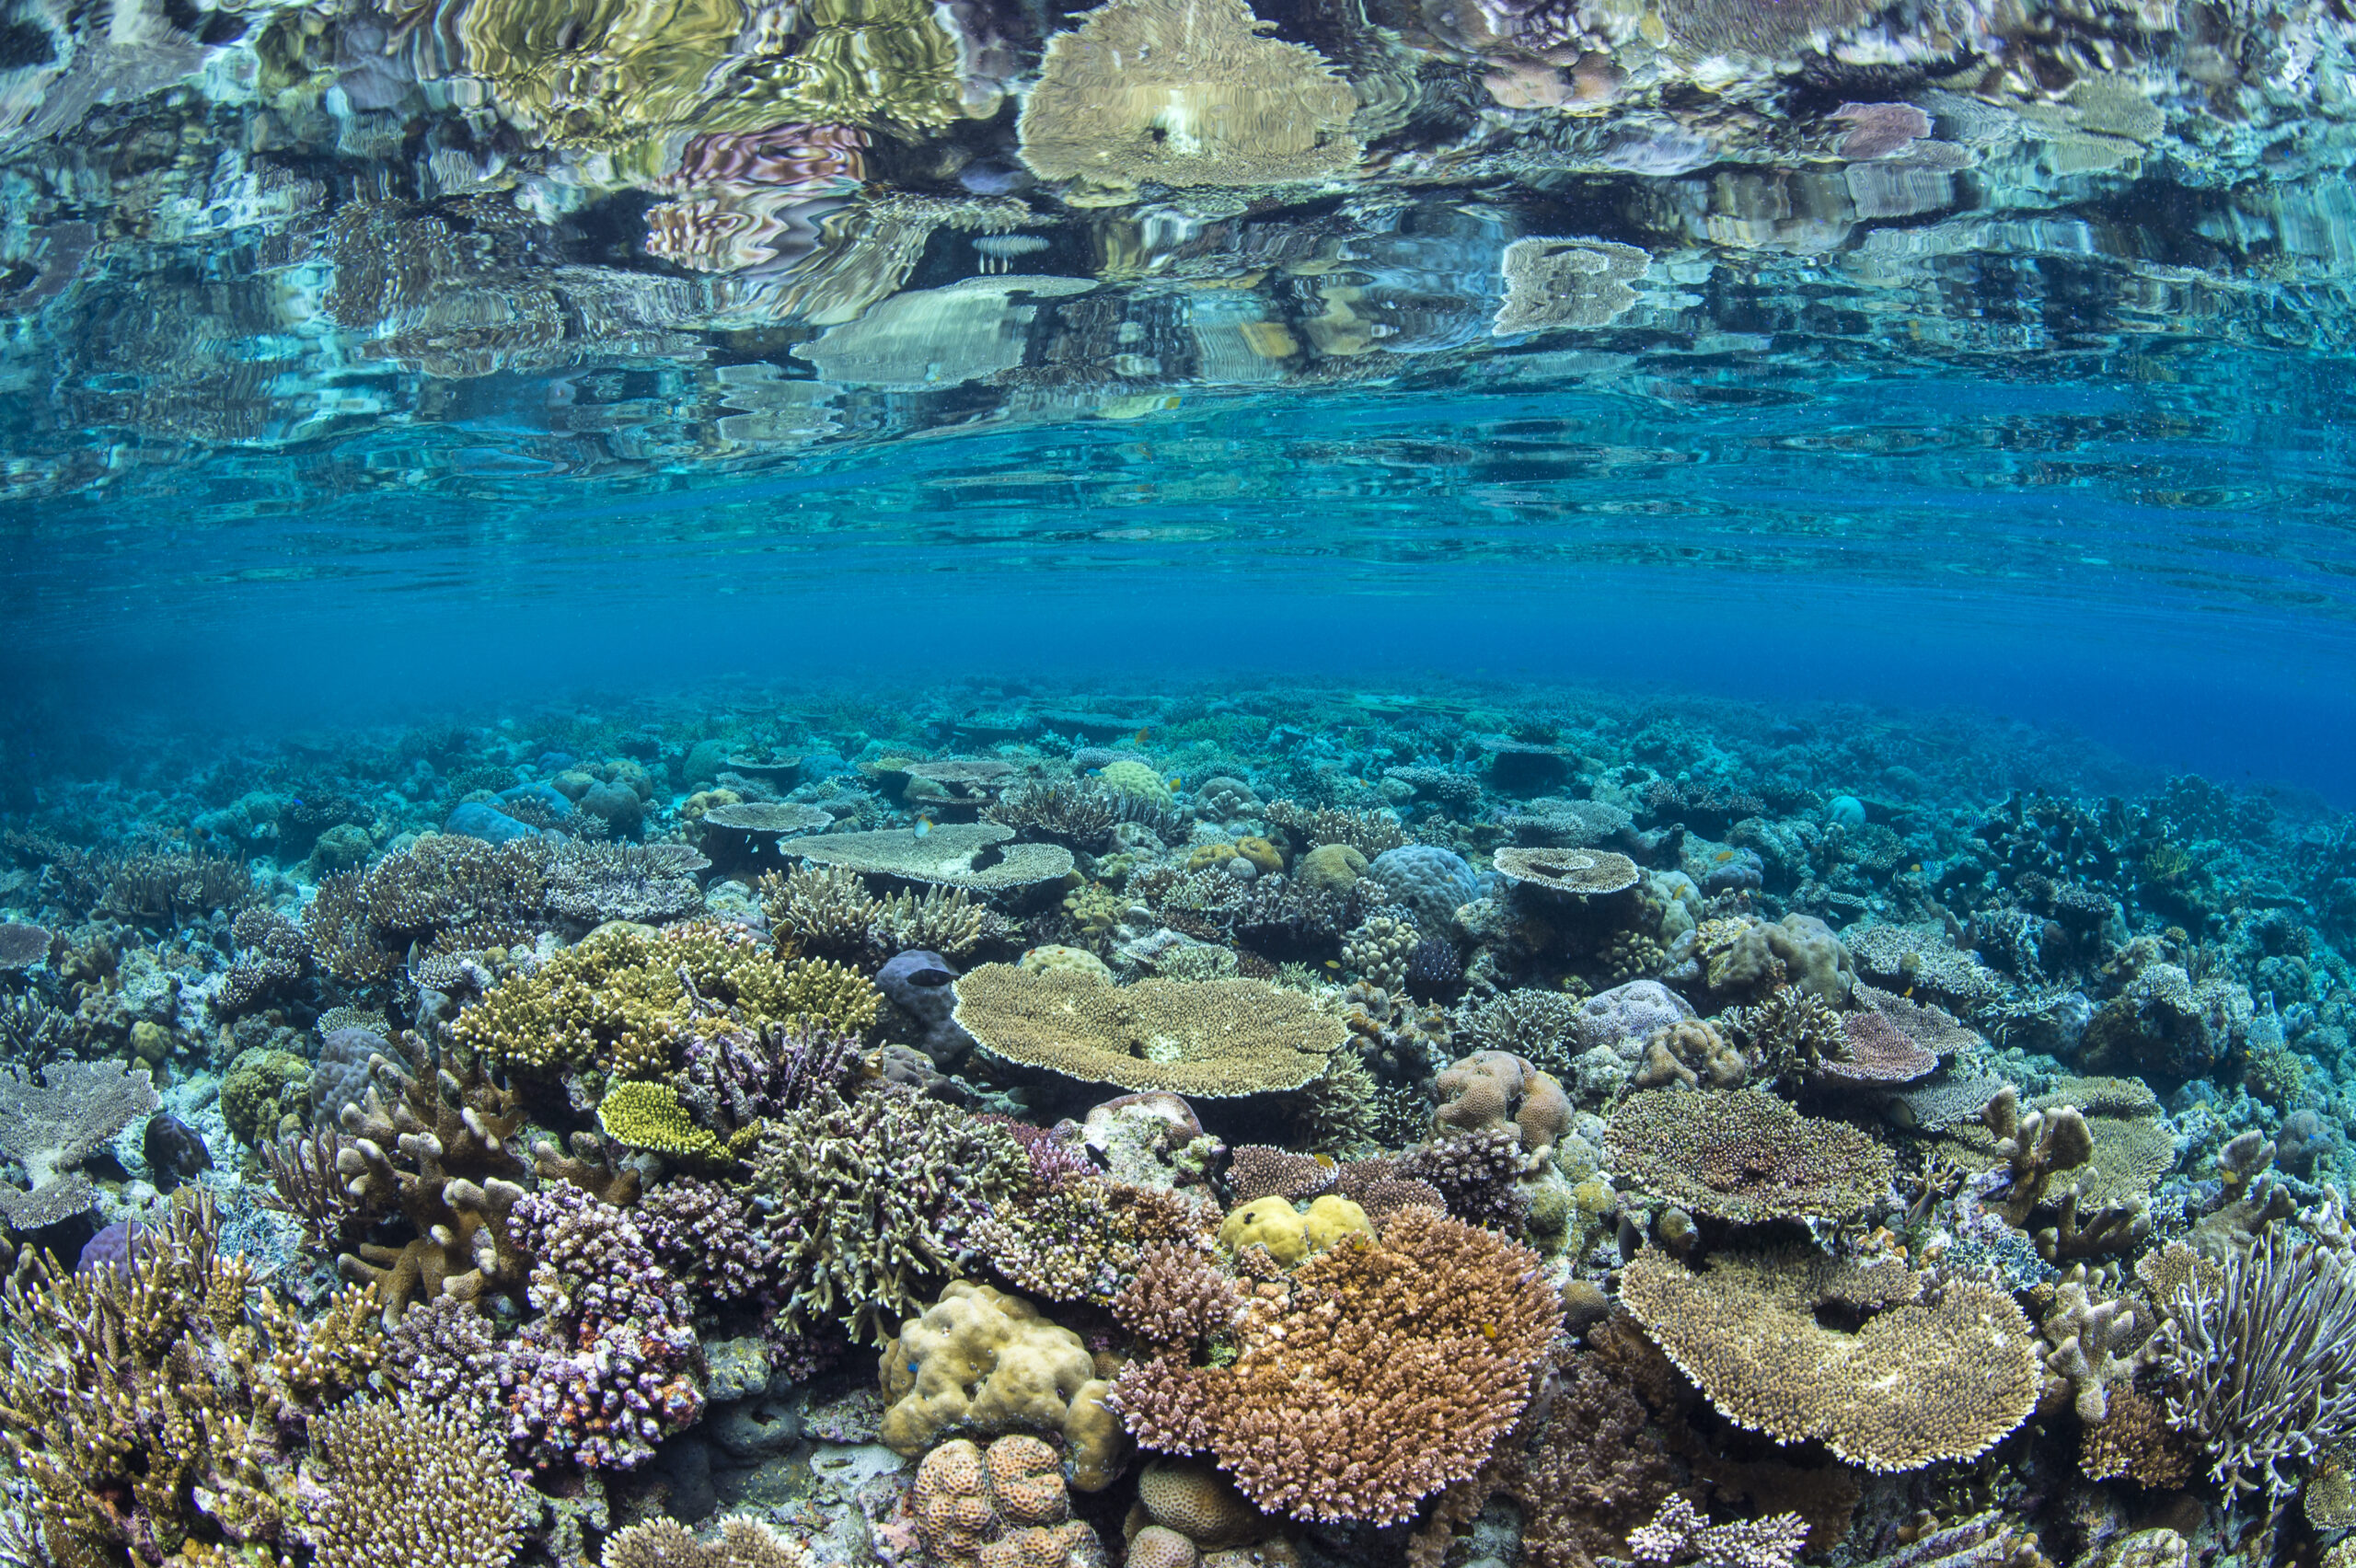 Image taken under the Ceram sea, Tropical West Pacific Ocean. A diversity of hard corals thriving on a shallow reef, reflected in a calm surface of the sea. Misool, Raja Ampat, West Papua, Indonesia.